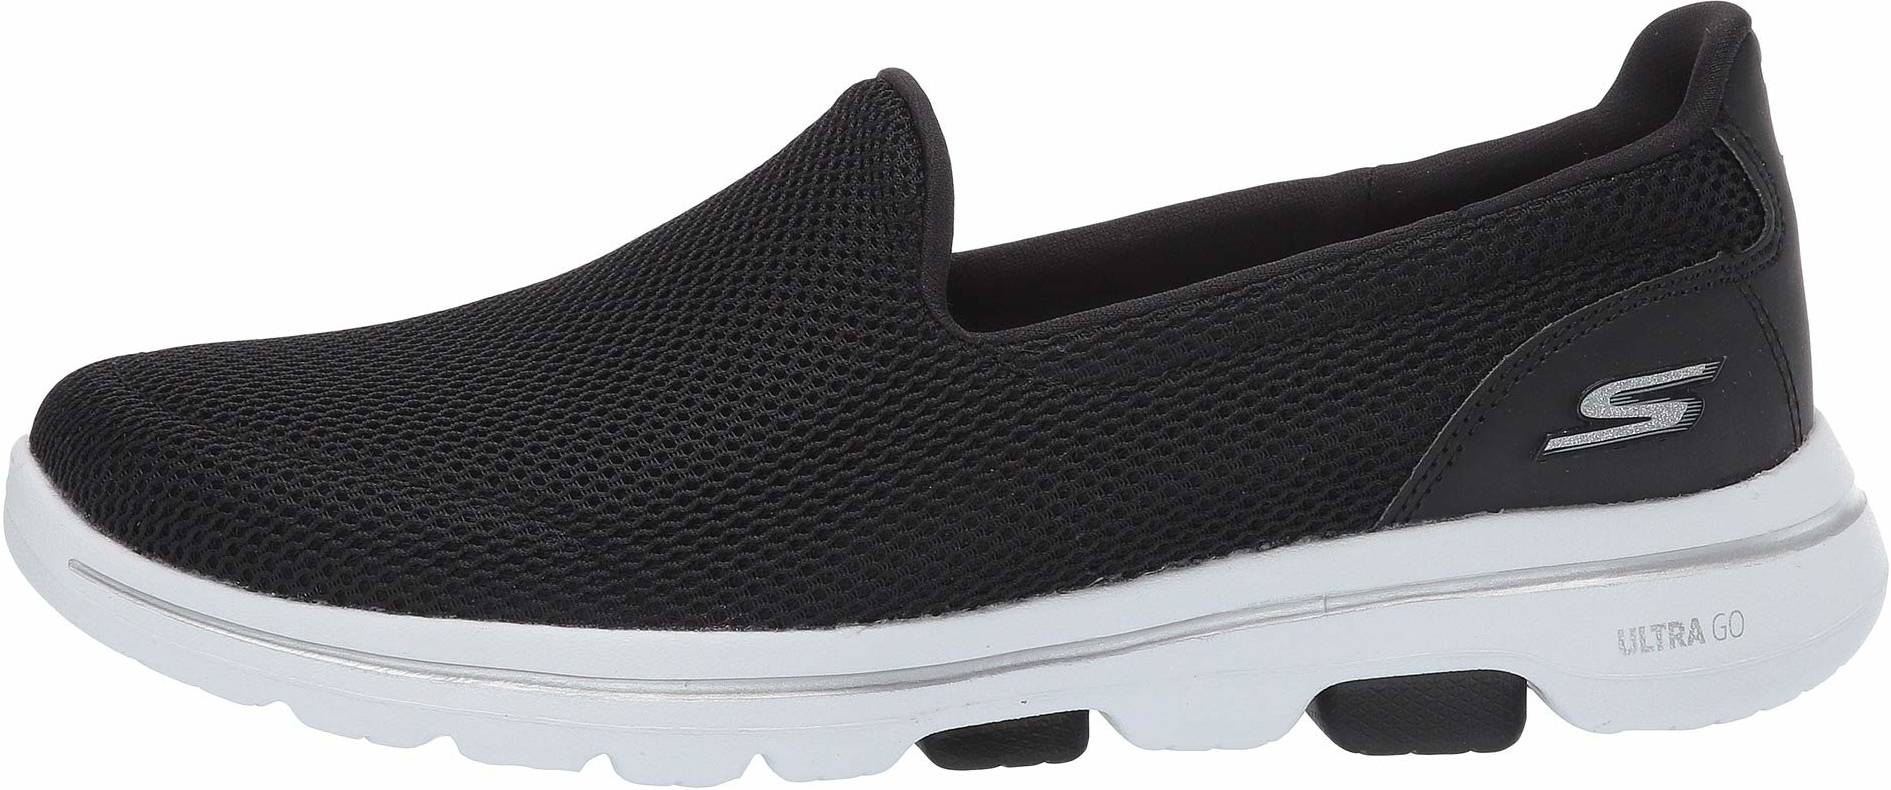 Black Mens Trainers Skechers Trainers Save 74% for Men Skechers Performance Go Walk Max in Black White 